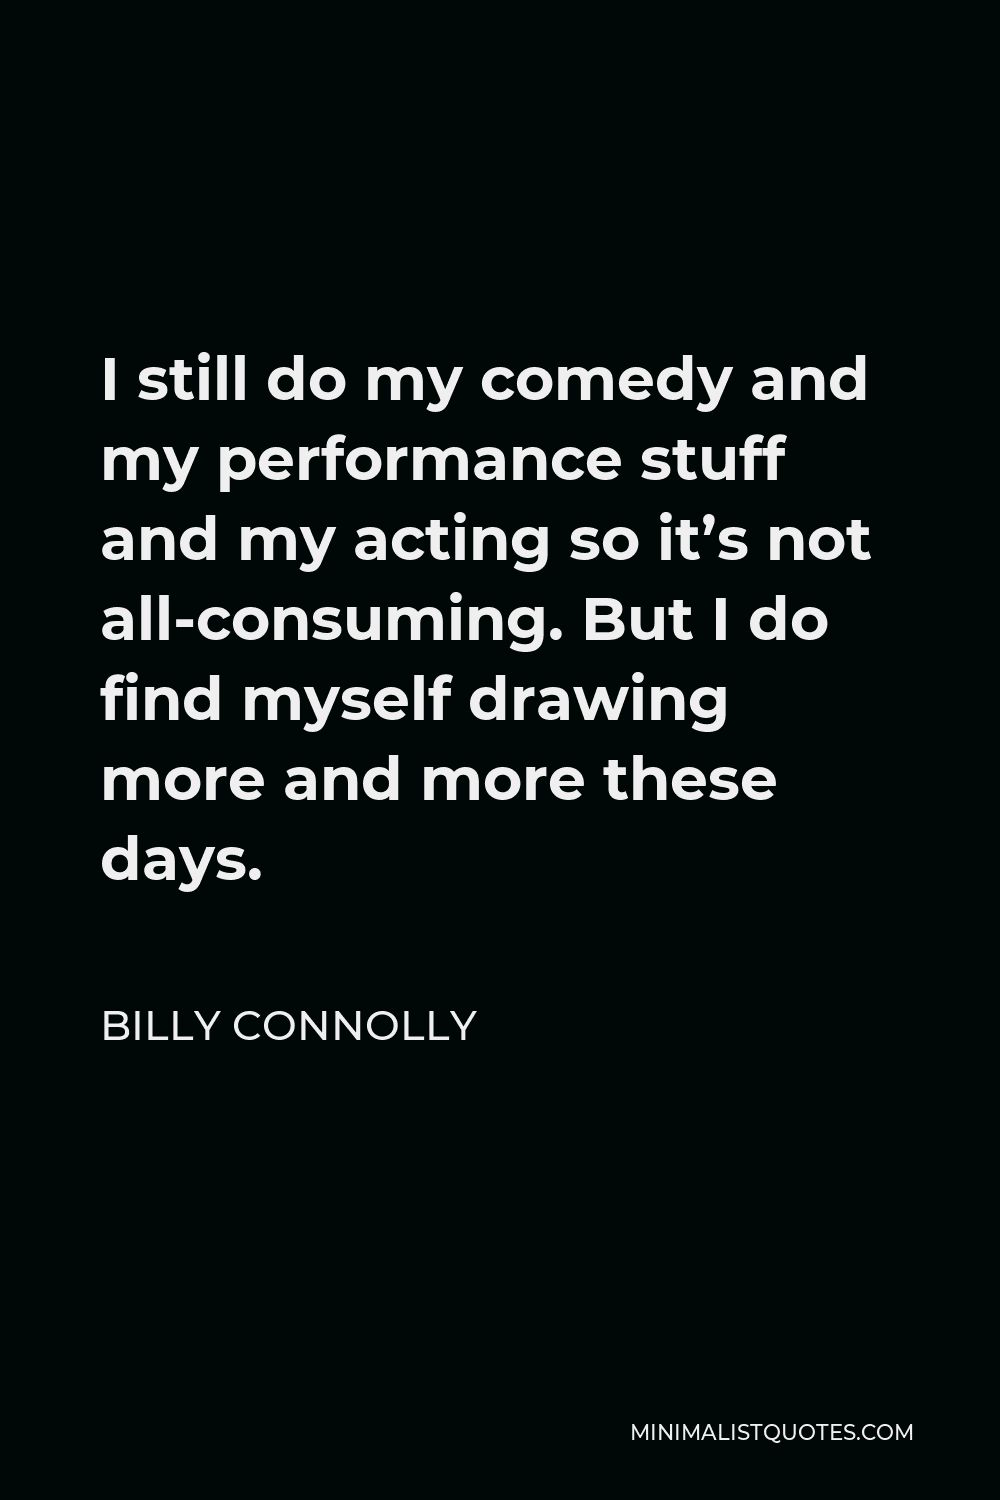 Billy Connolly Quote - I still do my comedy and my performance stuff and my acting so it’s not all-consuming. But I do find myself drawing more and more these days.